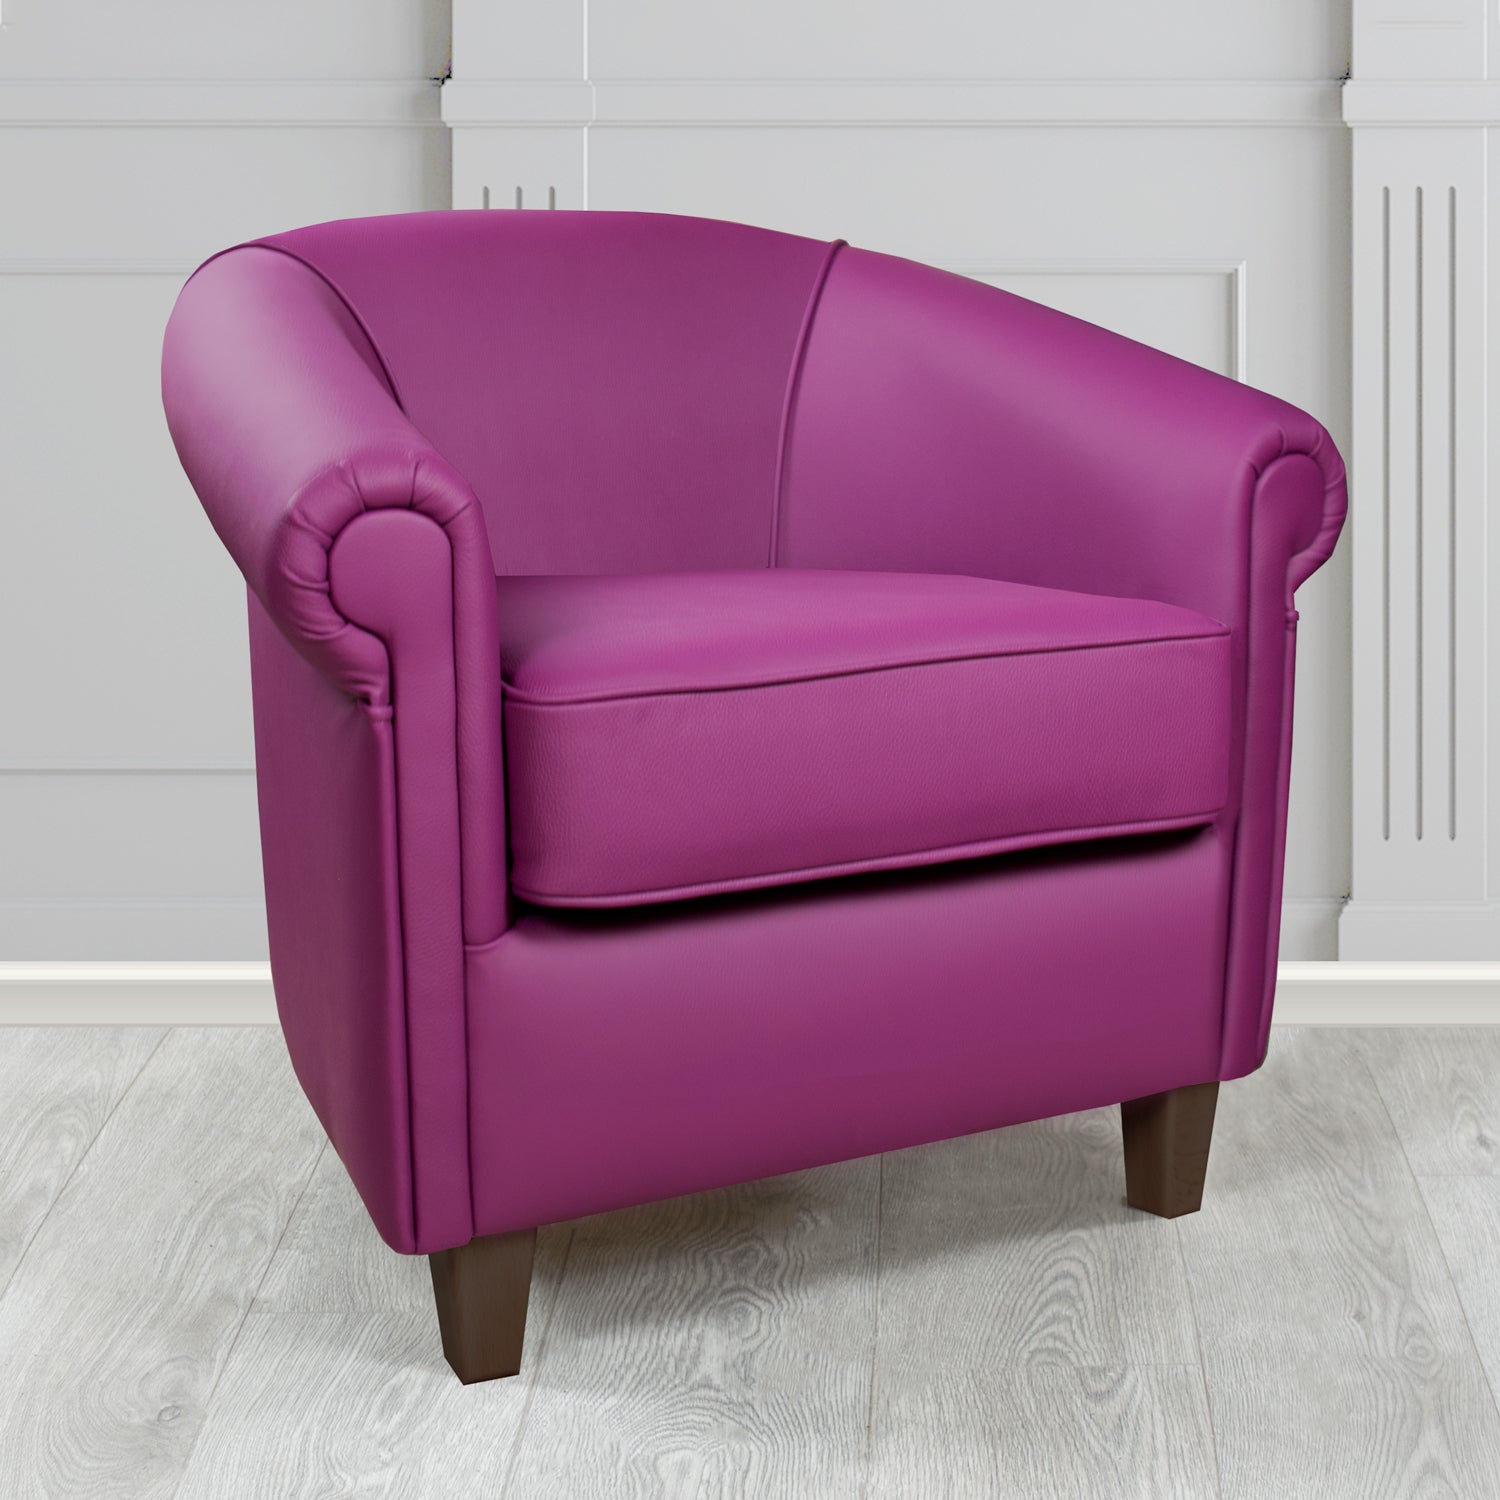 Siena Tub Chair in Crib 5 Shelly Wineberry Genuine Leather - The Tub Chair Shop